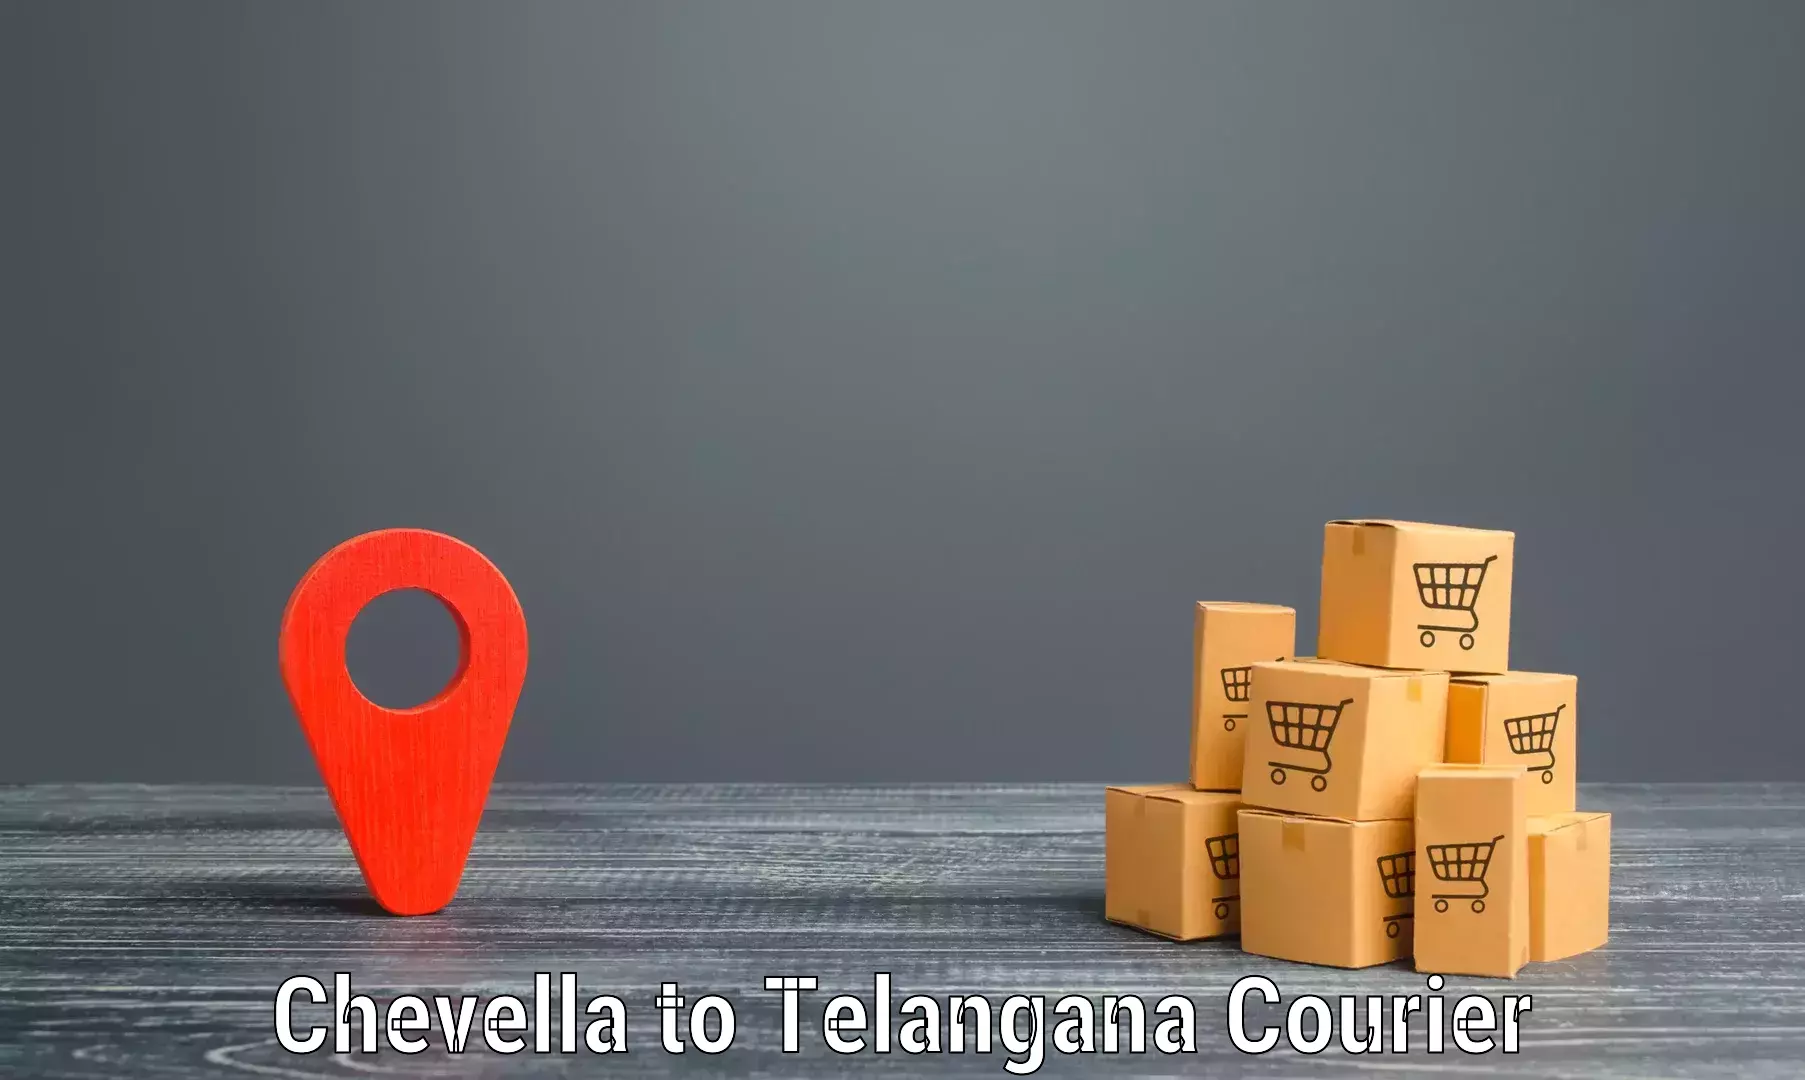 Business logistics support in Chevella to Gangadhara